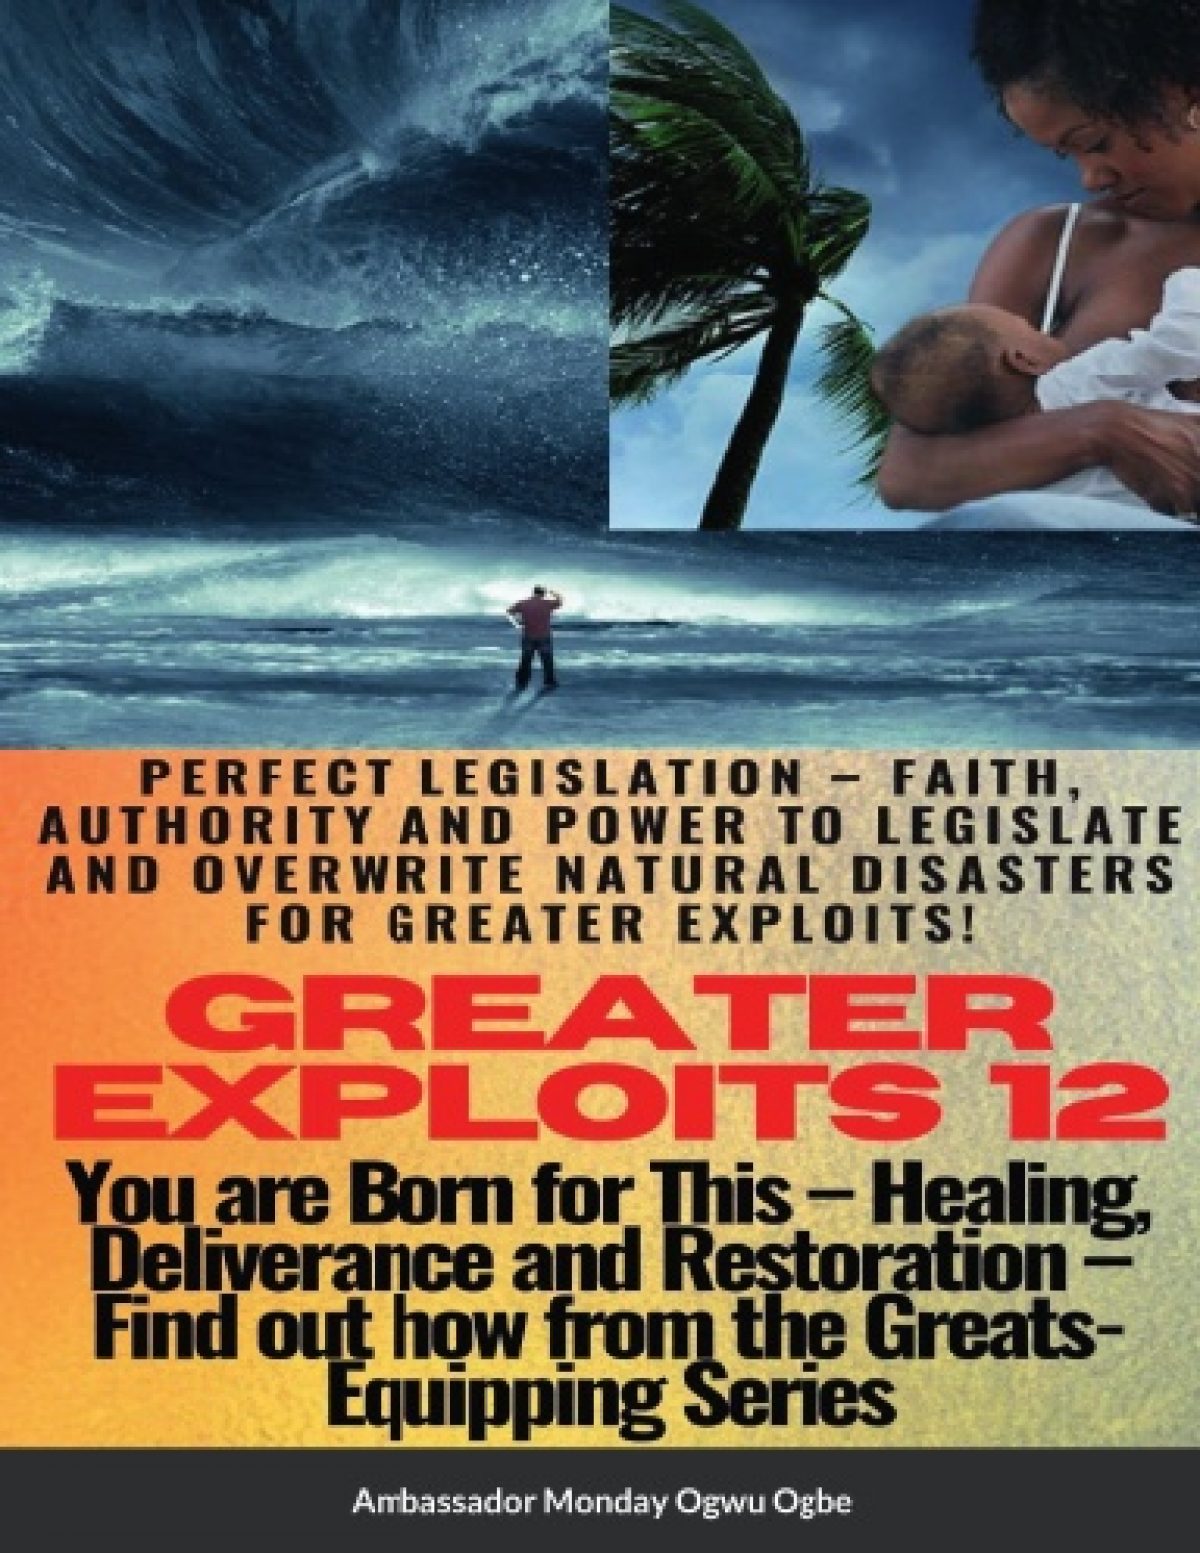 GREATER EXPLOITS 12 Paperback Edition – Perfect Legislation – Faith, Authority and Power to LEGISLATE and OVERWRITE Natural disasters for greater exploits! – Healing, Deliverance and Restoration – You are BORN for this!